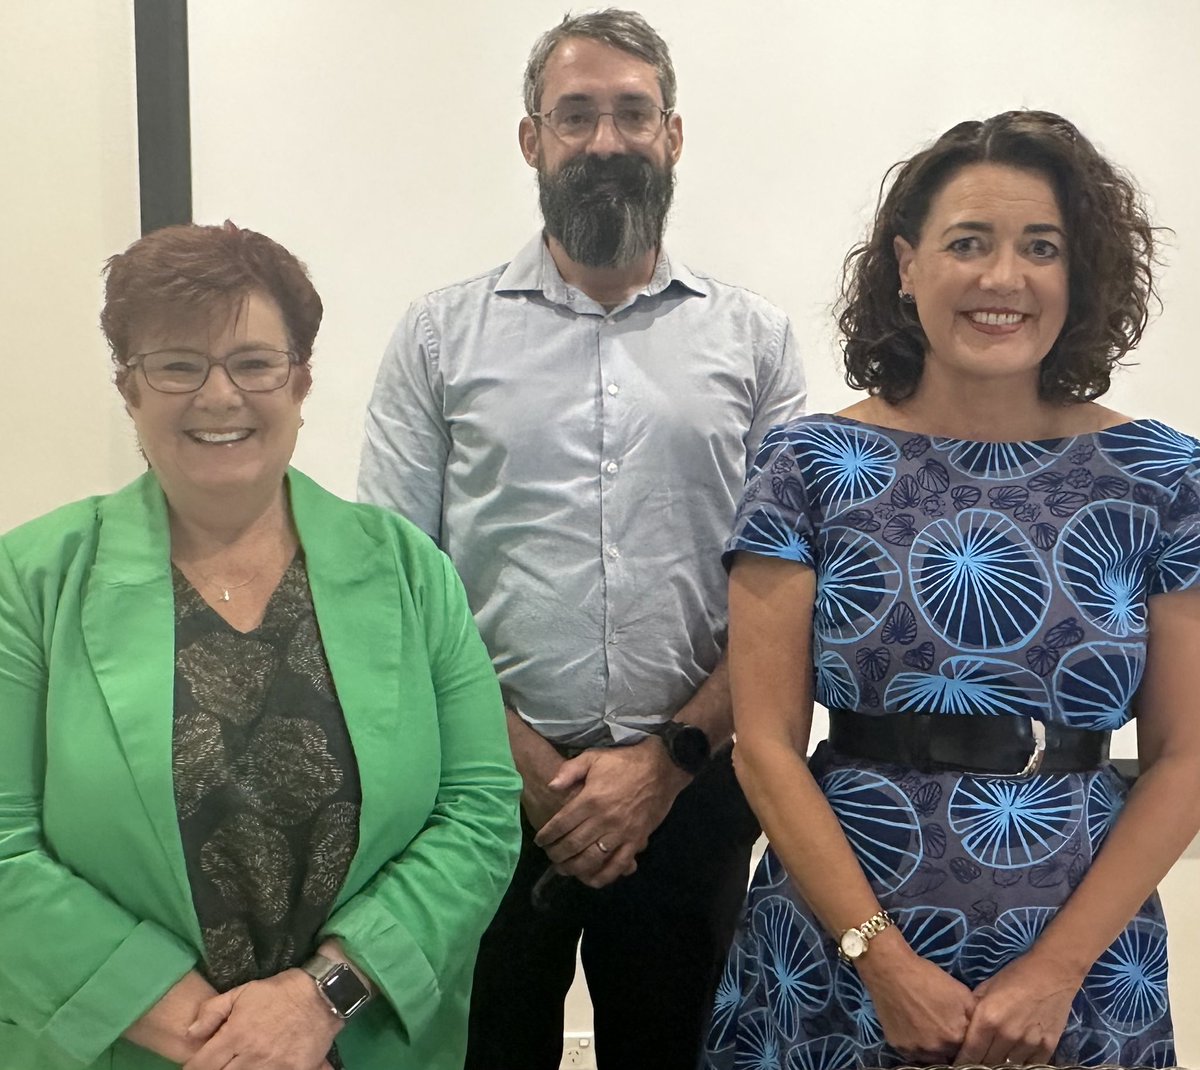 Yesterday, the Joint Standing Committee on the NDIS met with participants, witnesses and advocates in Darwin to hear about the experiences of those living with disability in rural, remote and very remote communities. Thanks to everyone who came along to our hearing.